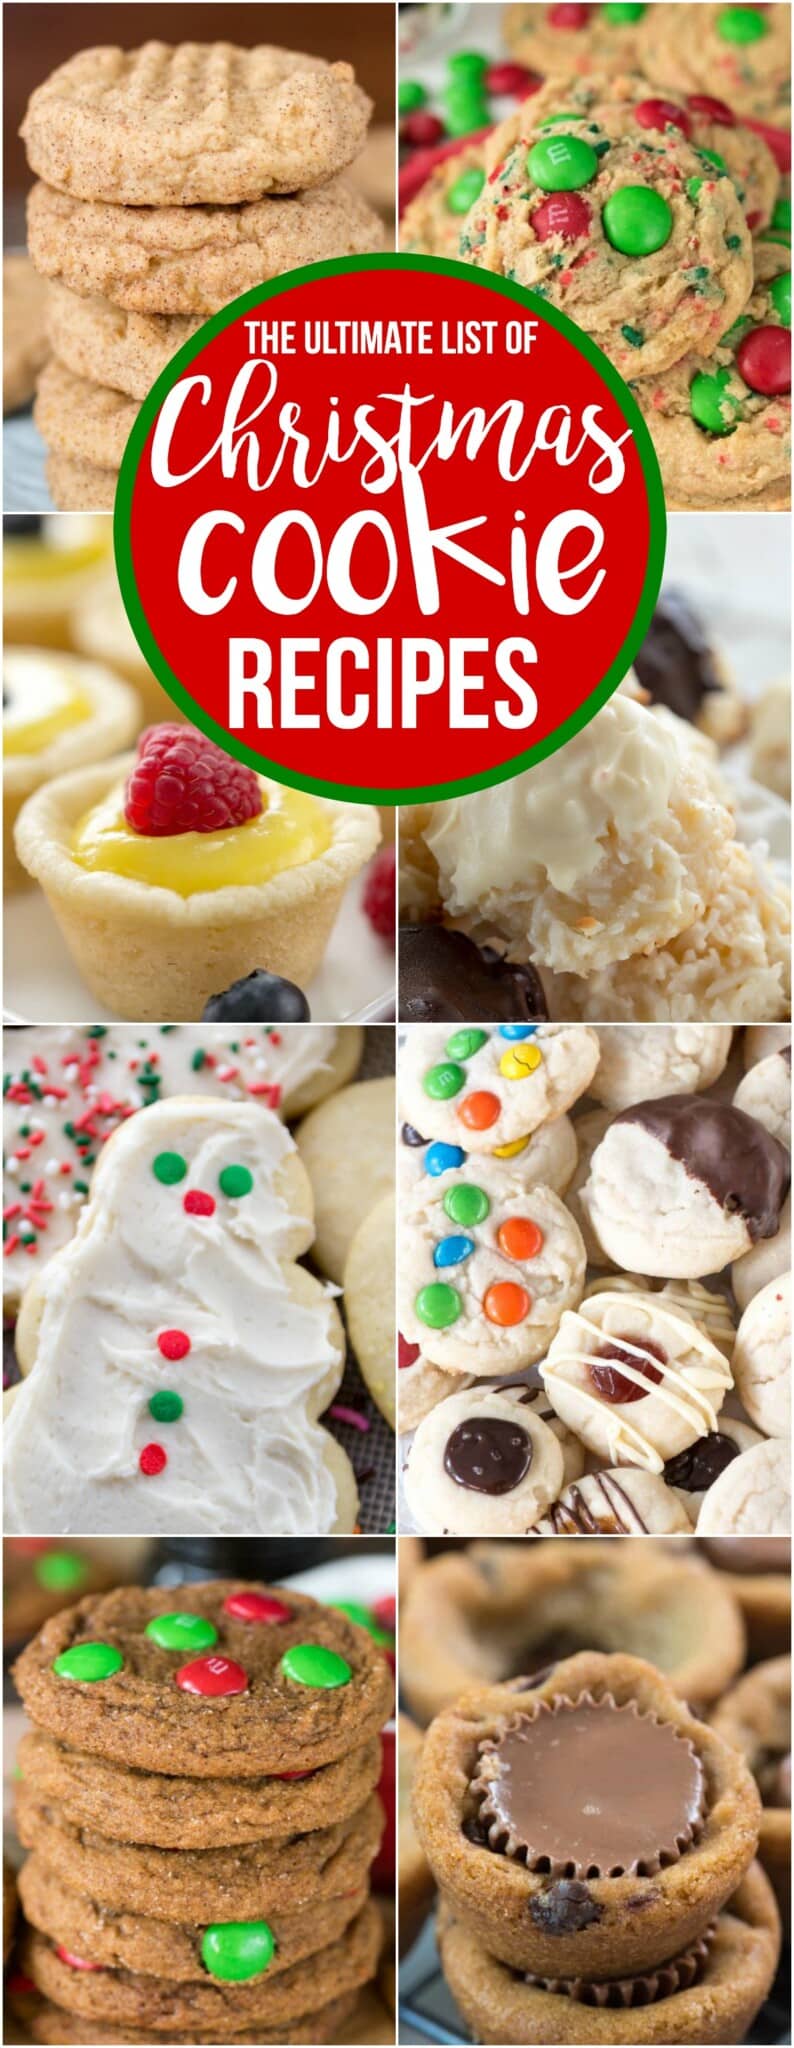 This is the ULTIMATE list of Christmas Cookies you'll need this year. There's something for everyone on this list, including tips and tricks for the best cookie gifting and storing.